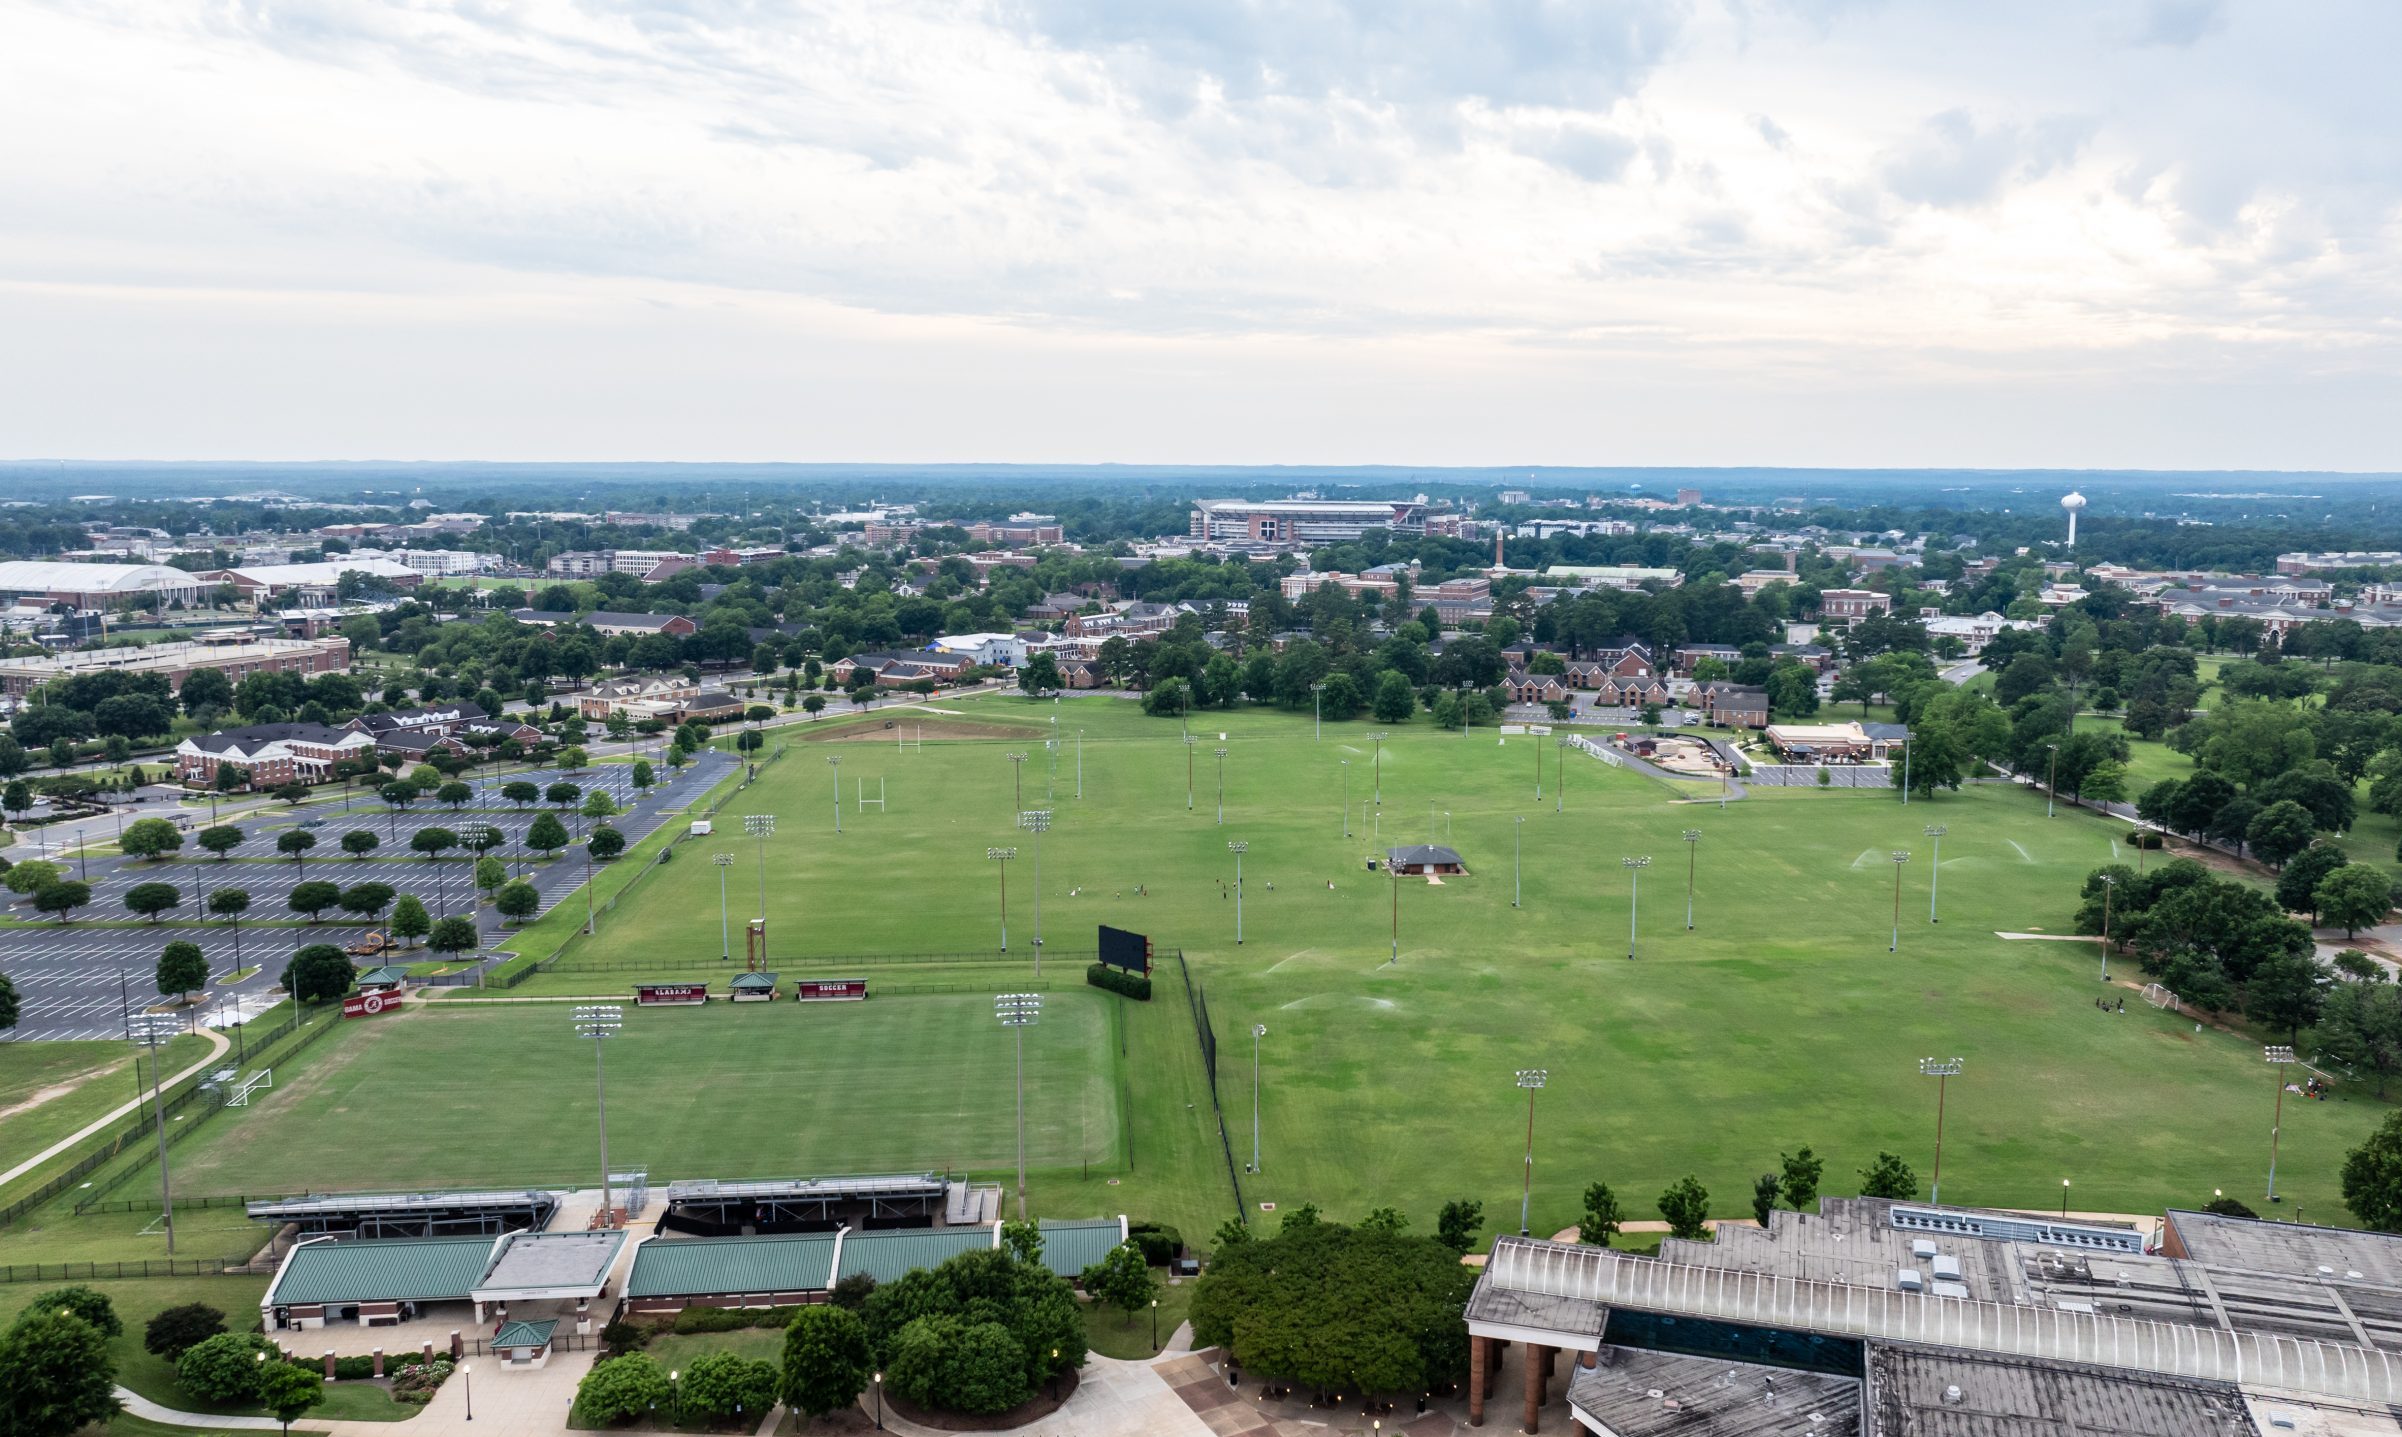 Aerial view of the Recreation fields